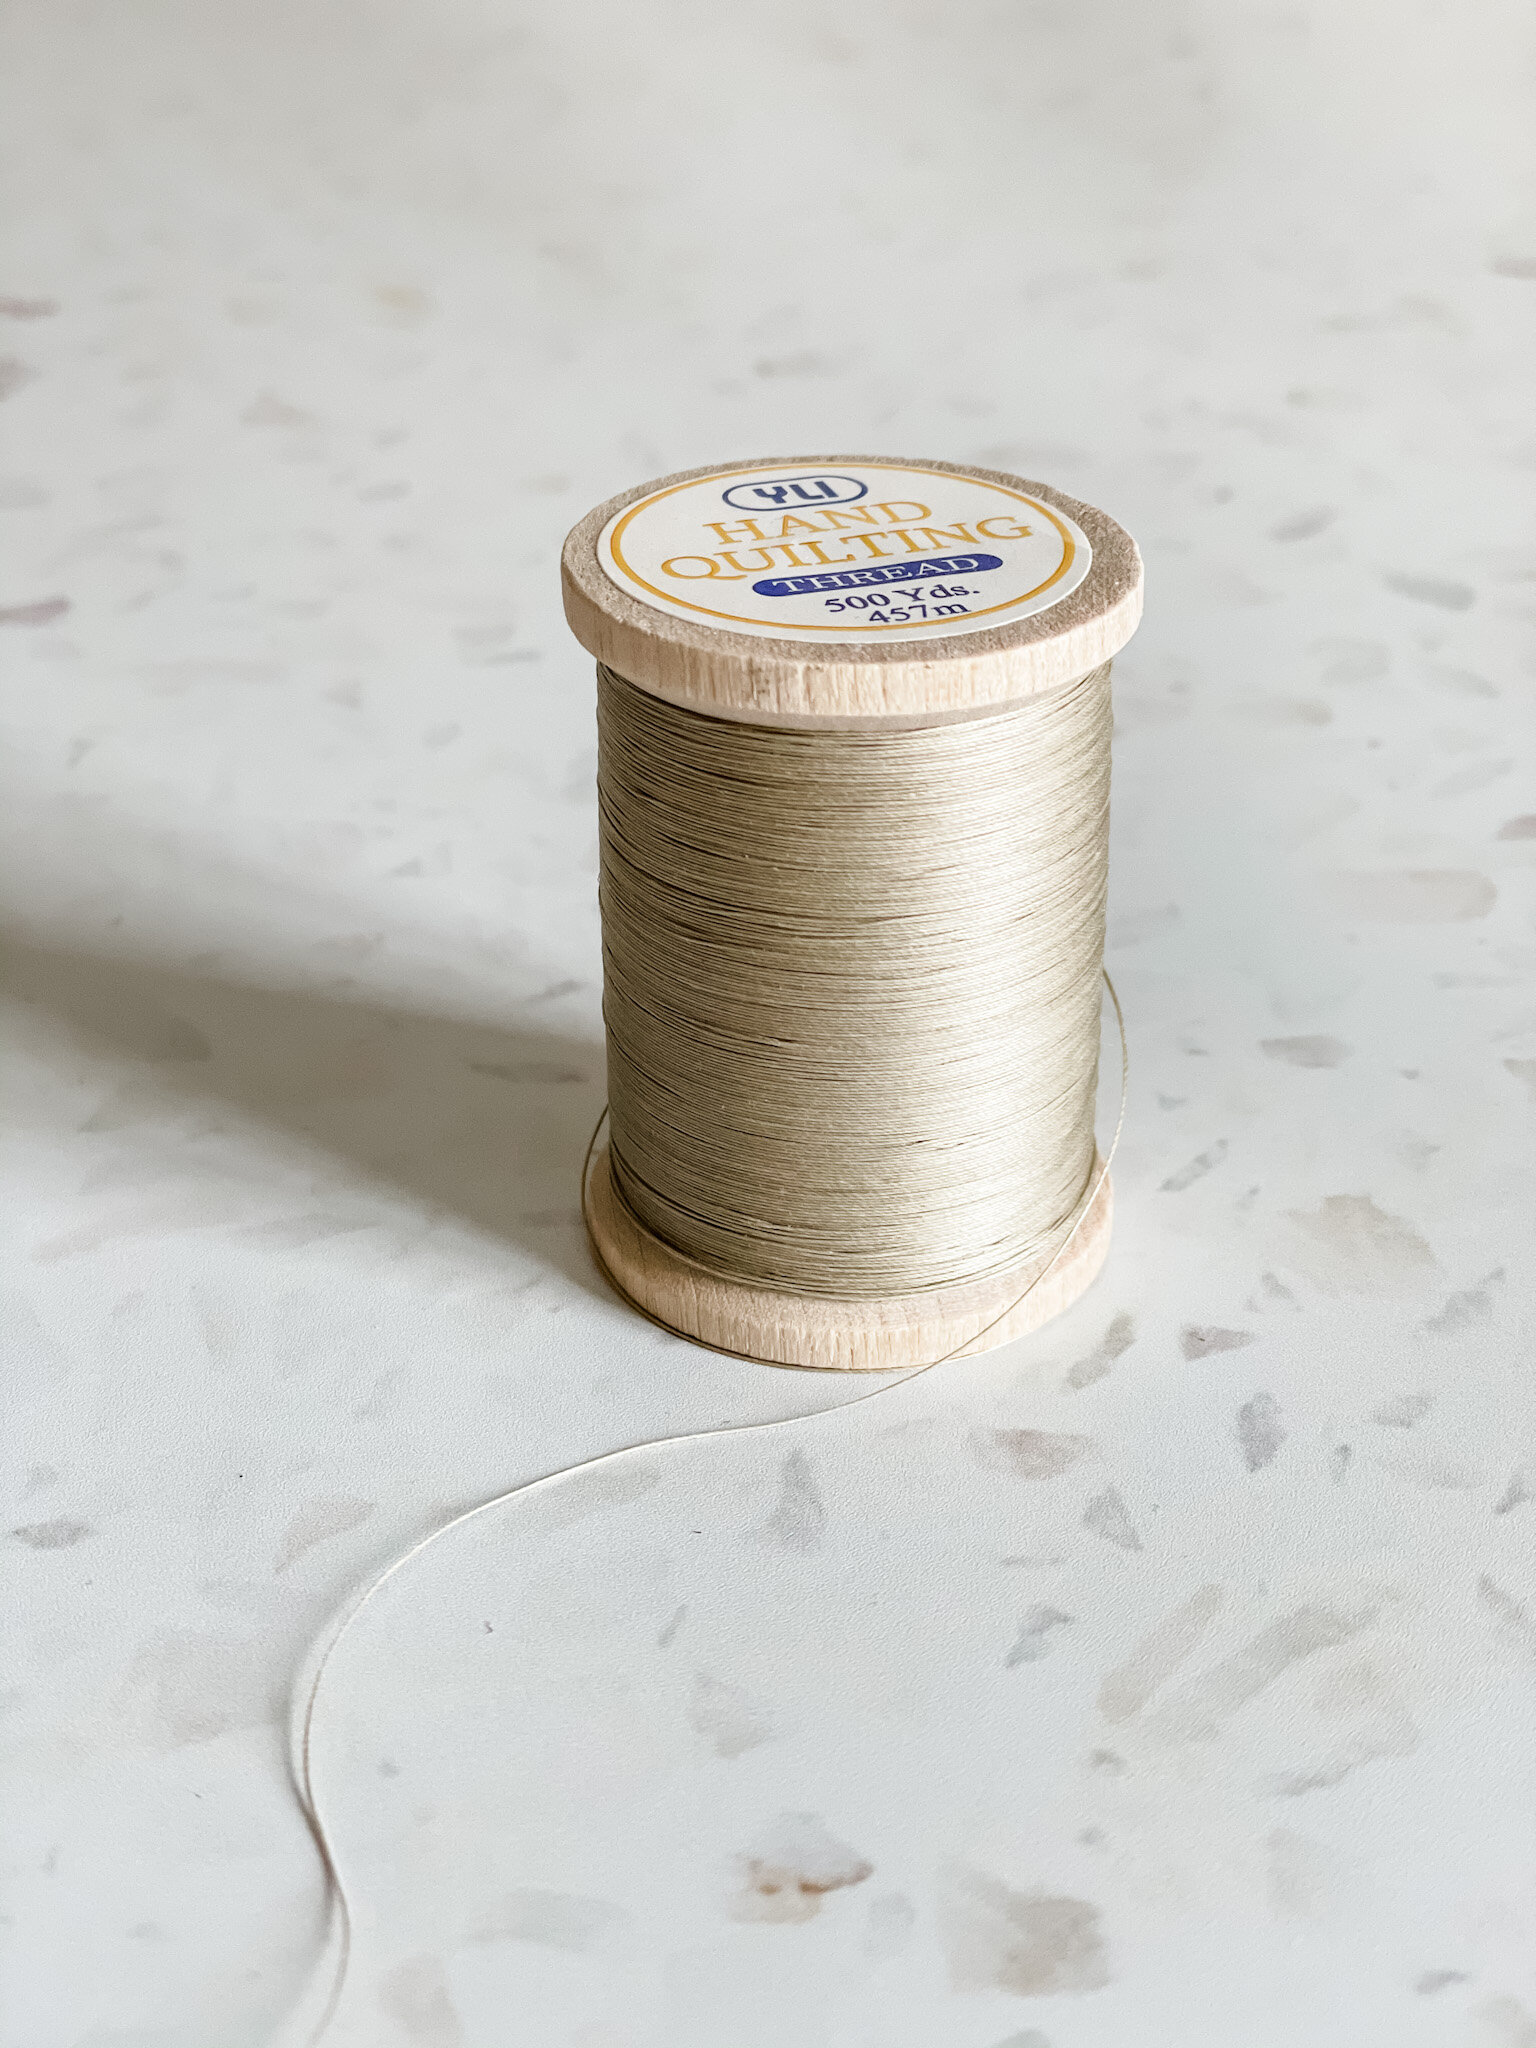 Hand Quilting Thread Glazed Cotton — Material Goods